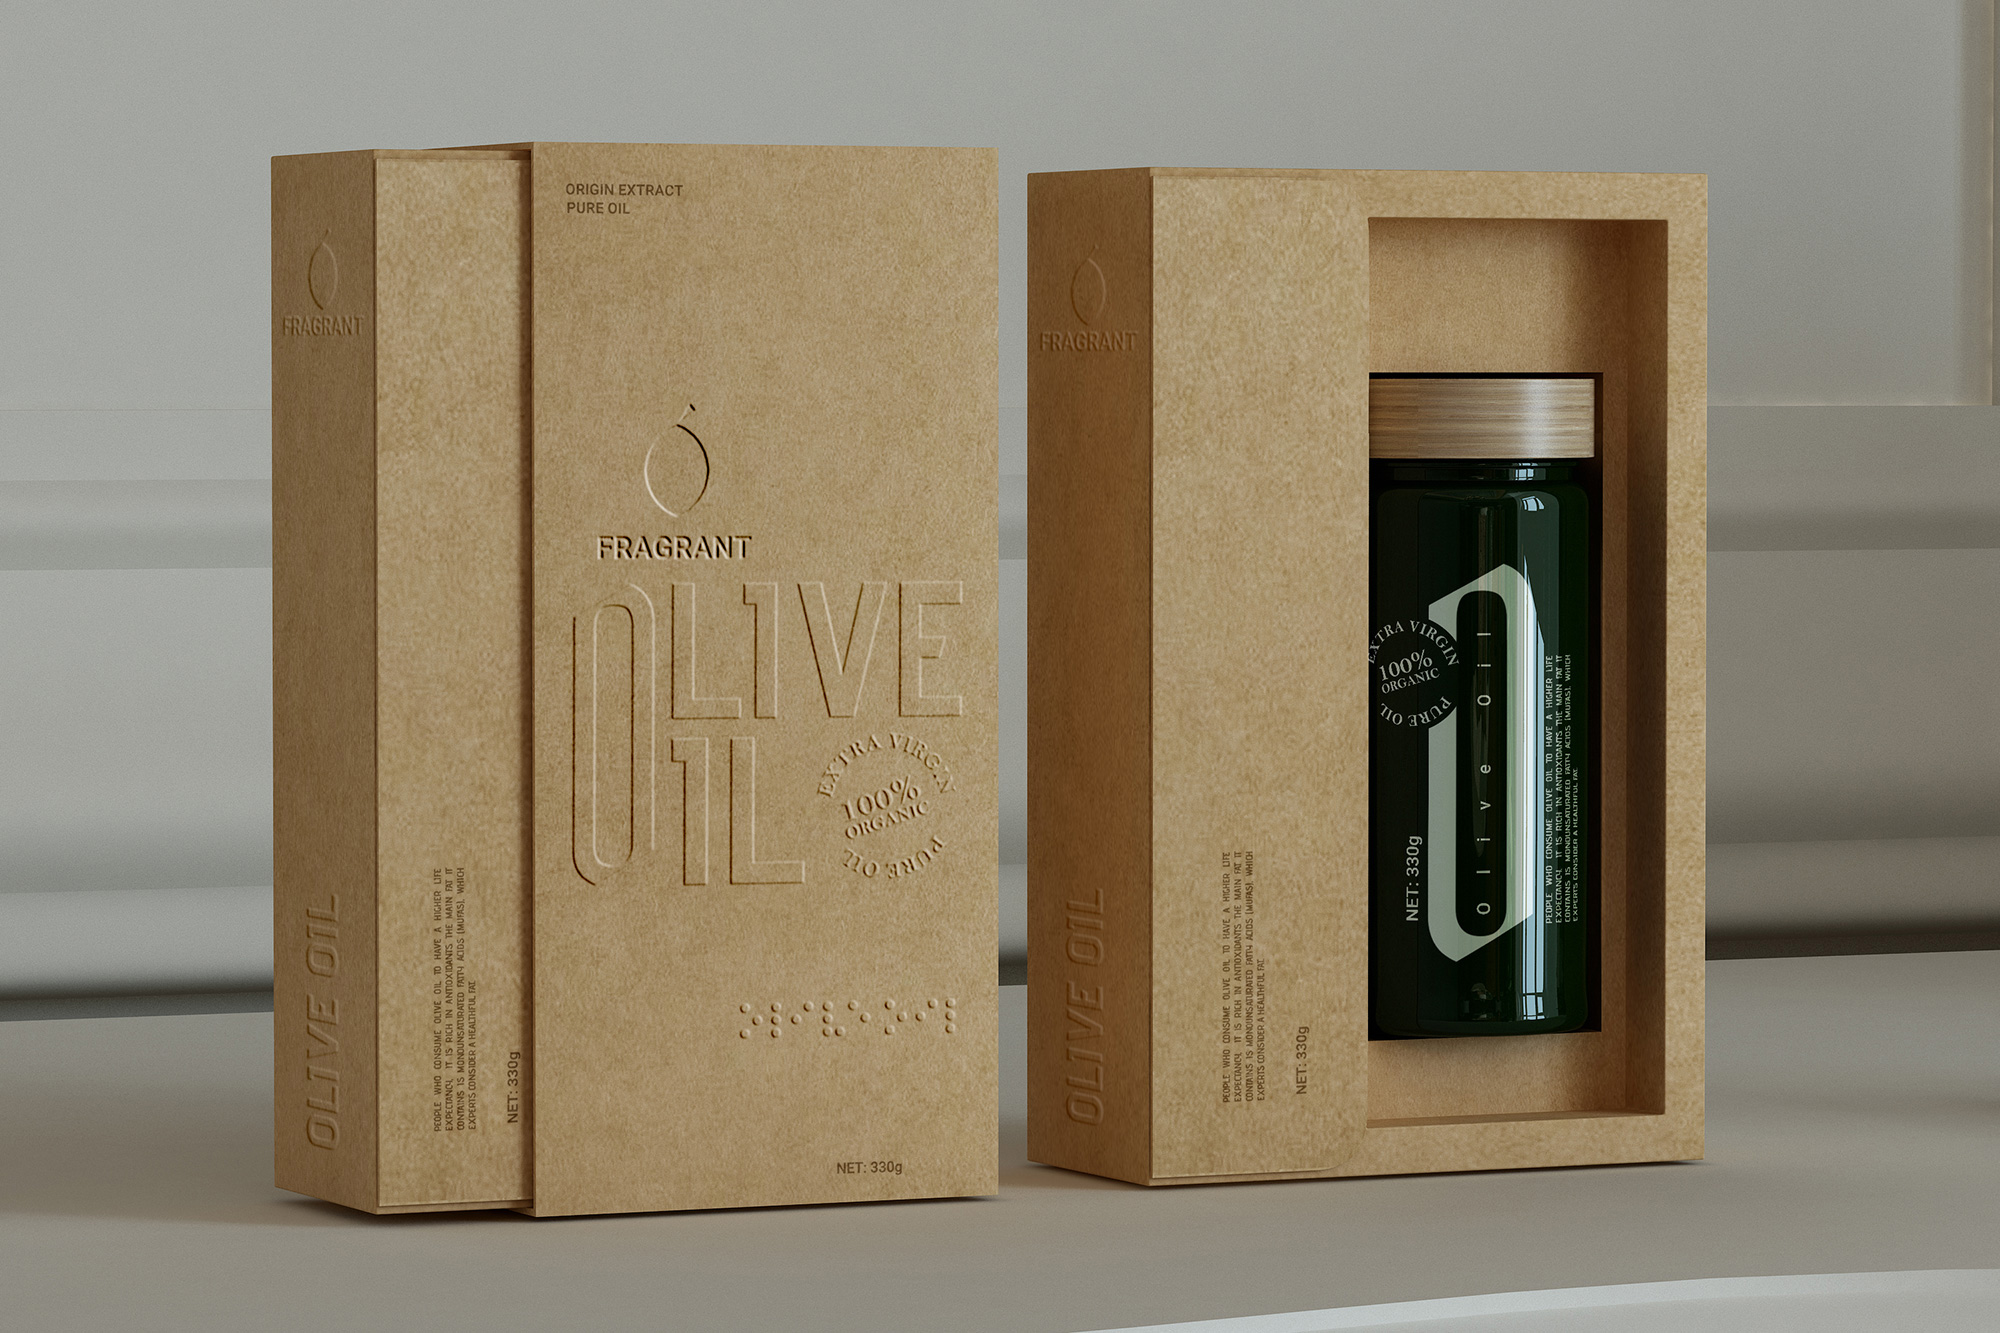 Olive Oil Packaging Design by Taha Fakouri